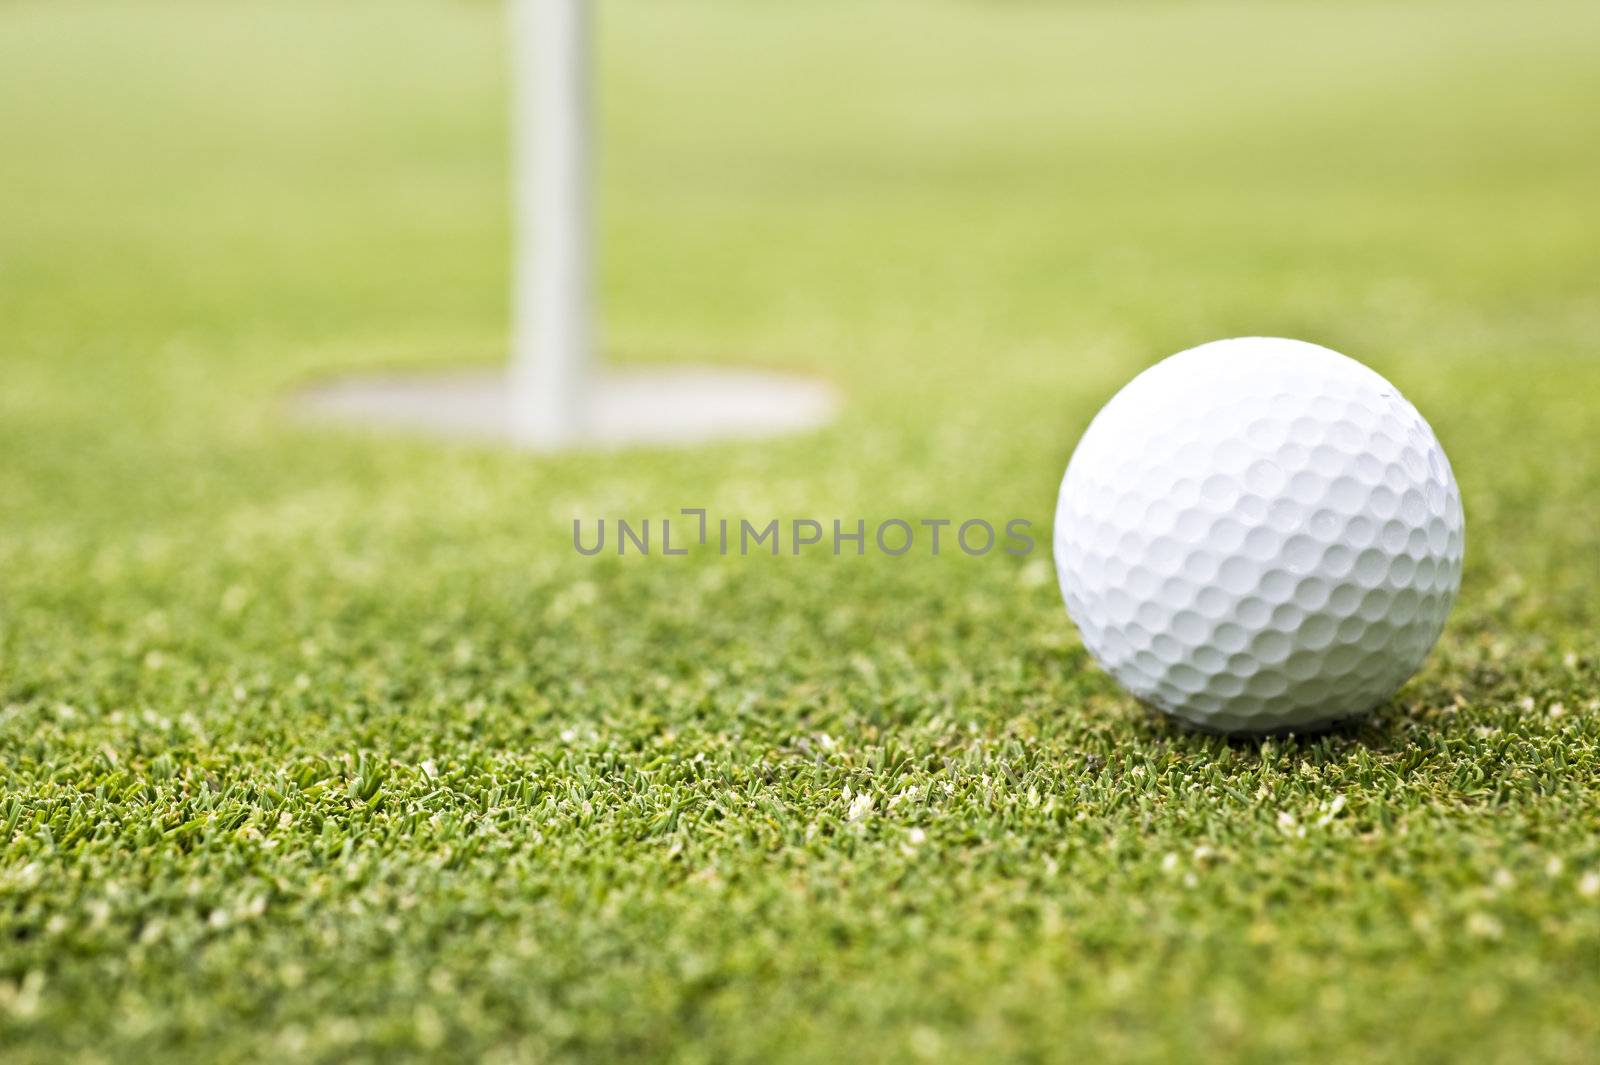 Golf ball on a putting green with the flag in background by tish1